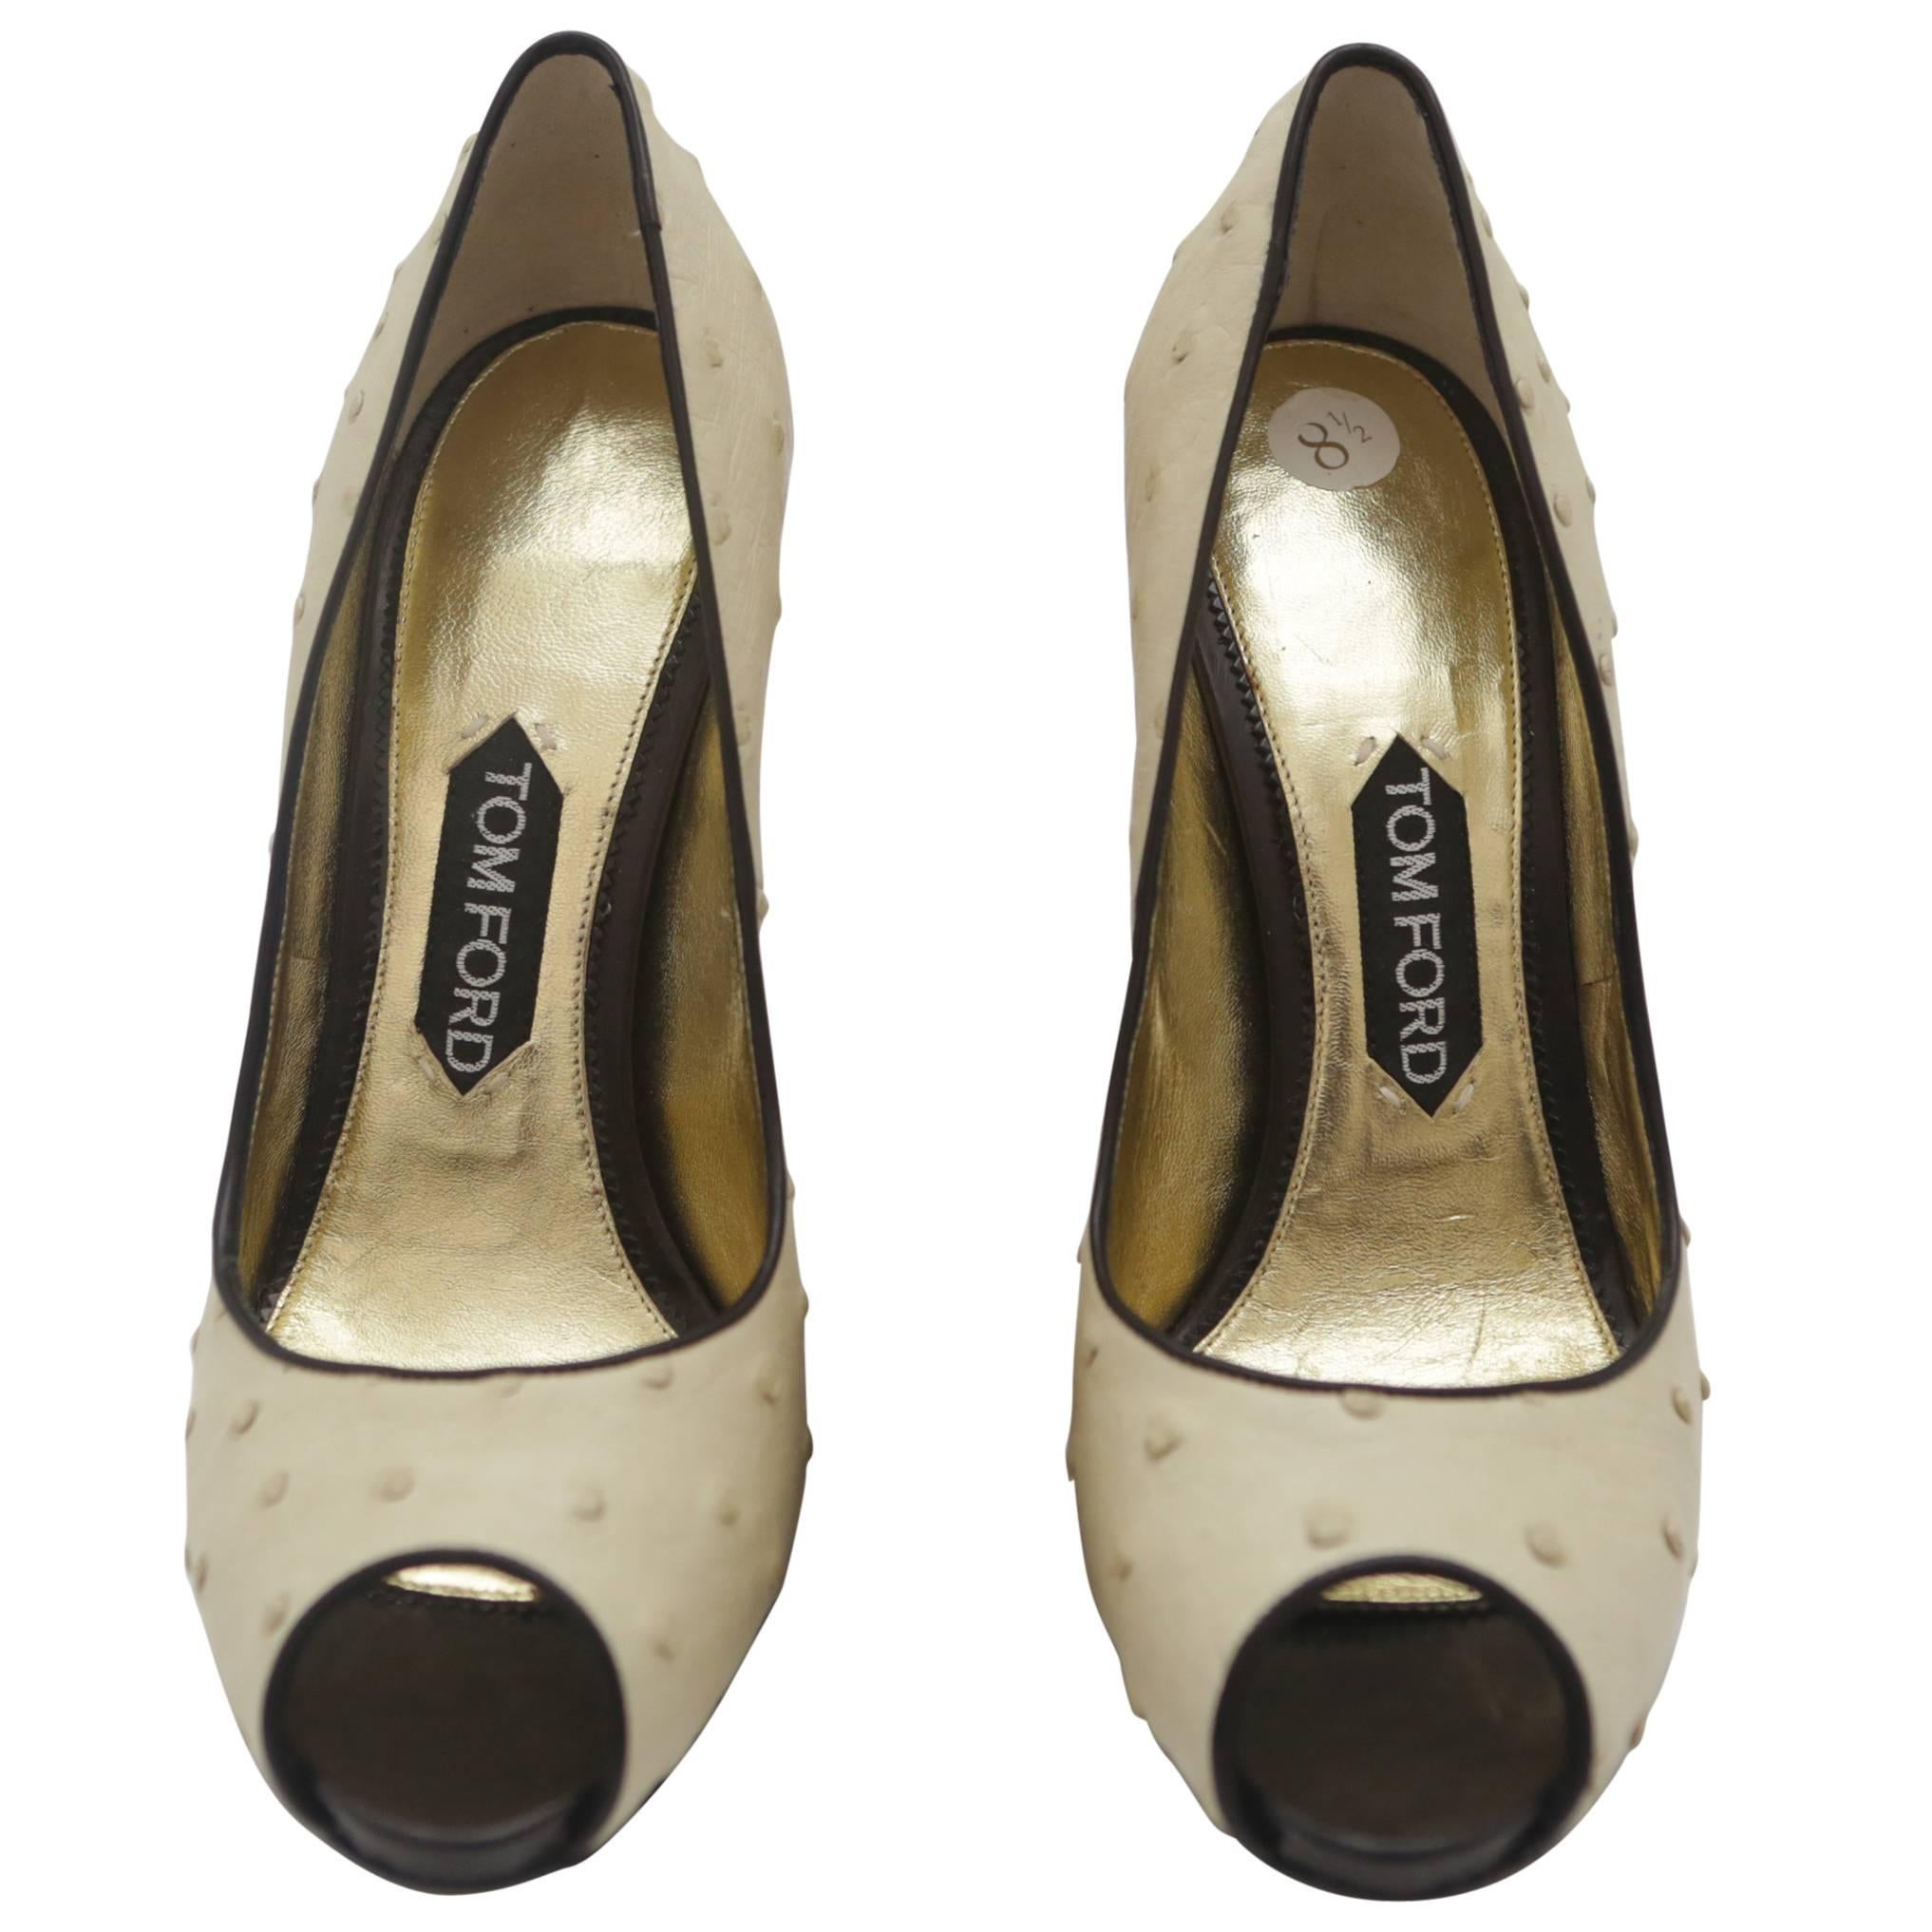 Tom Ford Ostrich Leather Peep-toe Pumps